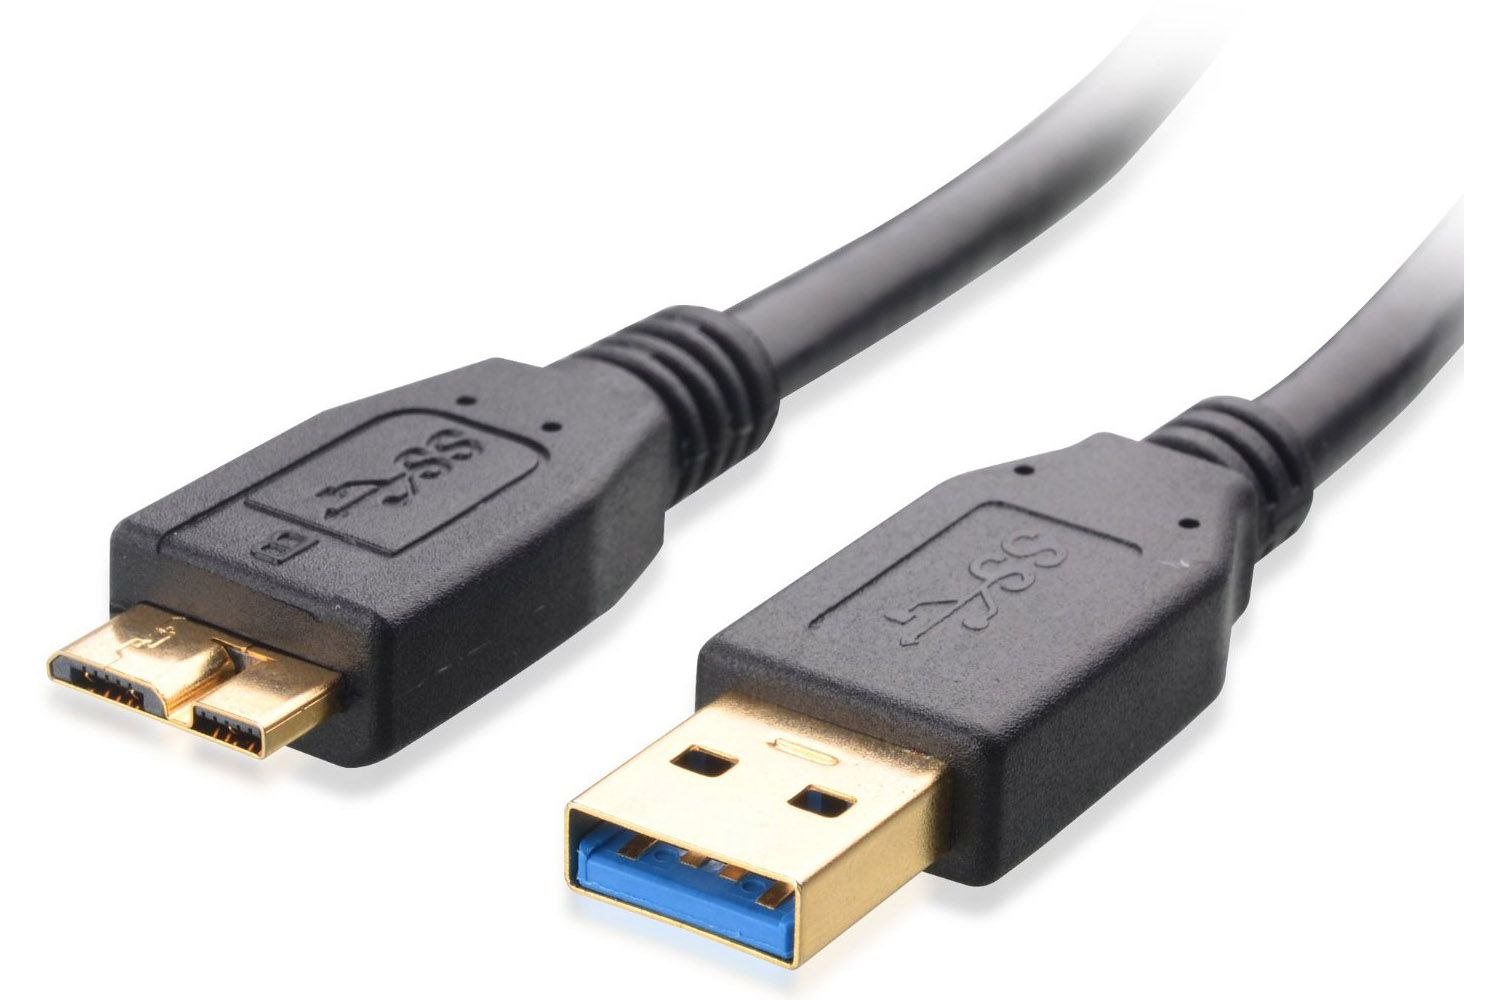 Usb v 2.0. Кабель юсб 3.0. Разъем юсб 3.0. USB 1.0. USB 3.0 Cable Micro-b to Type a.